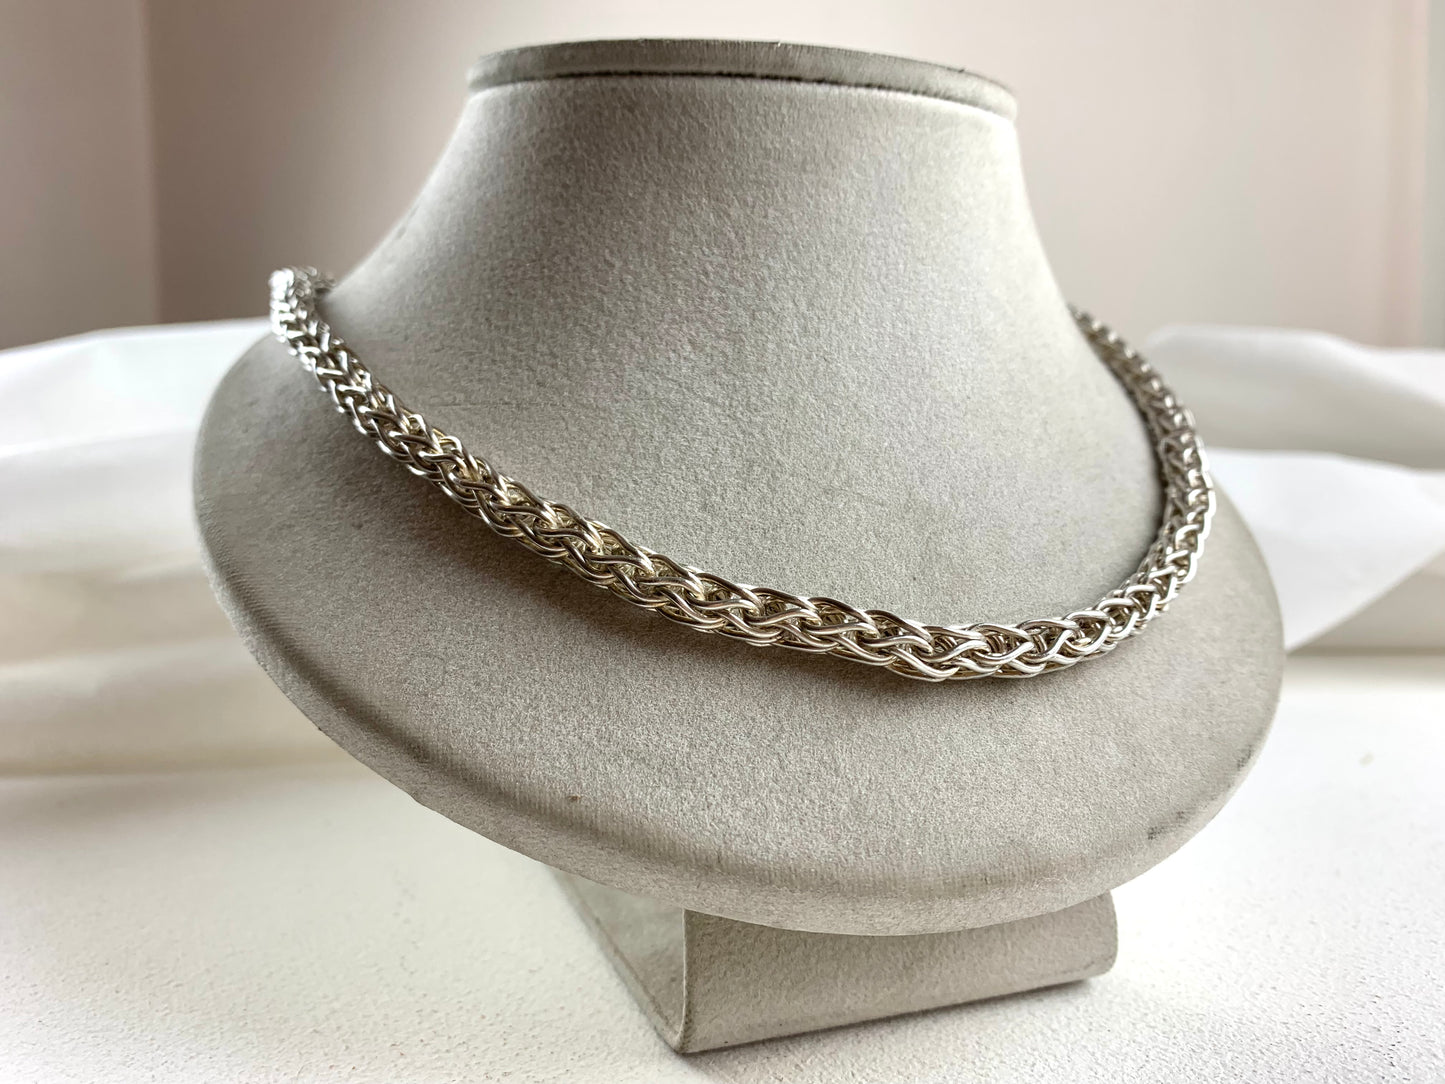 Betts, Malcolm - Silver Hand Woven Chain Necklace with Cognac Diamond Clasp